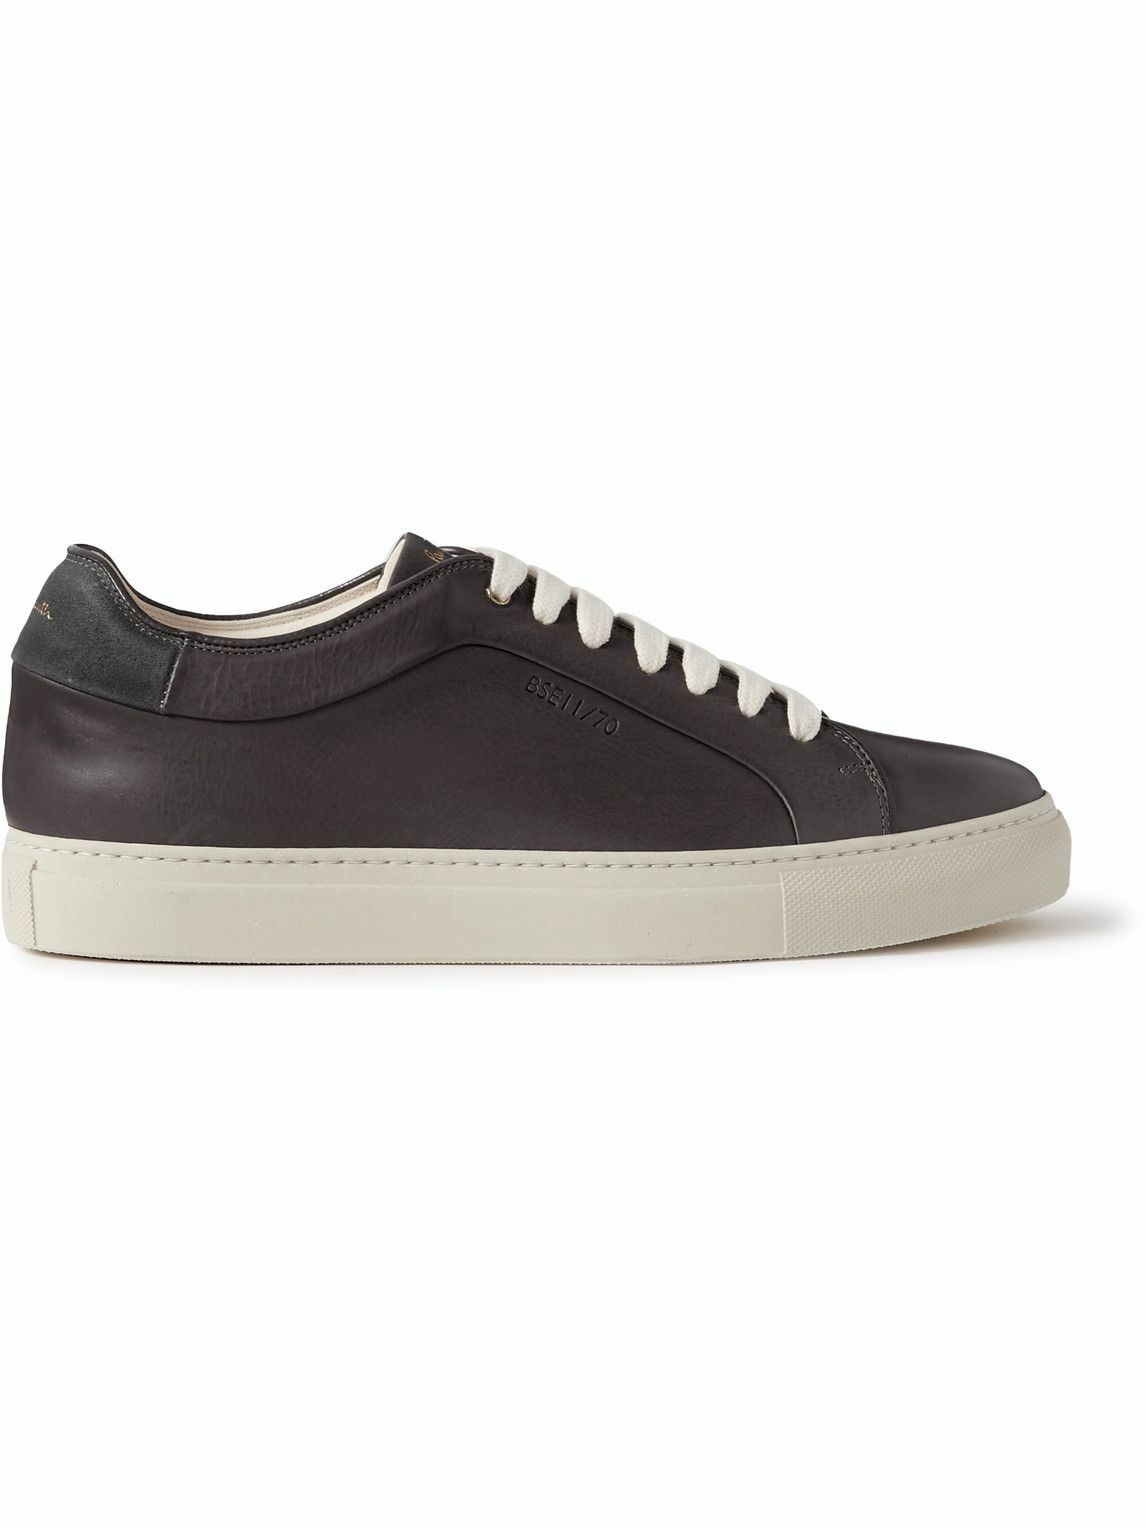 Paul Smith White Beck Sneakers Paul Smith